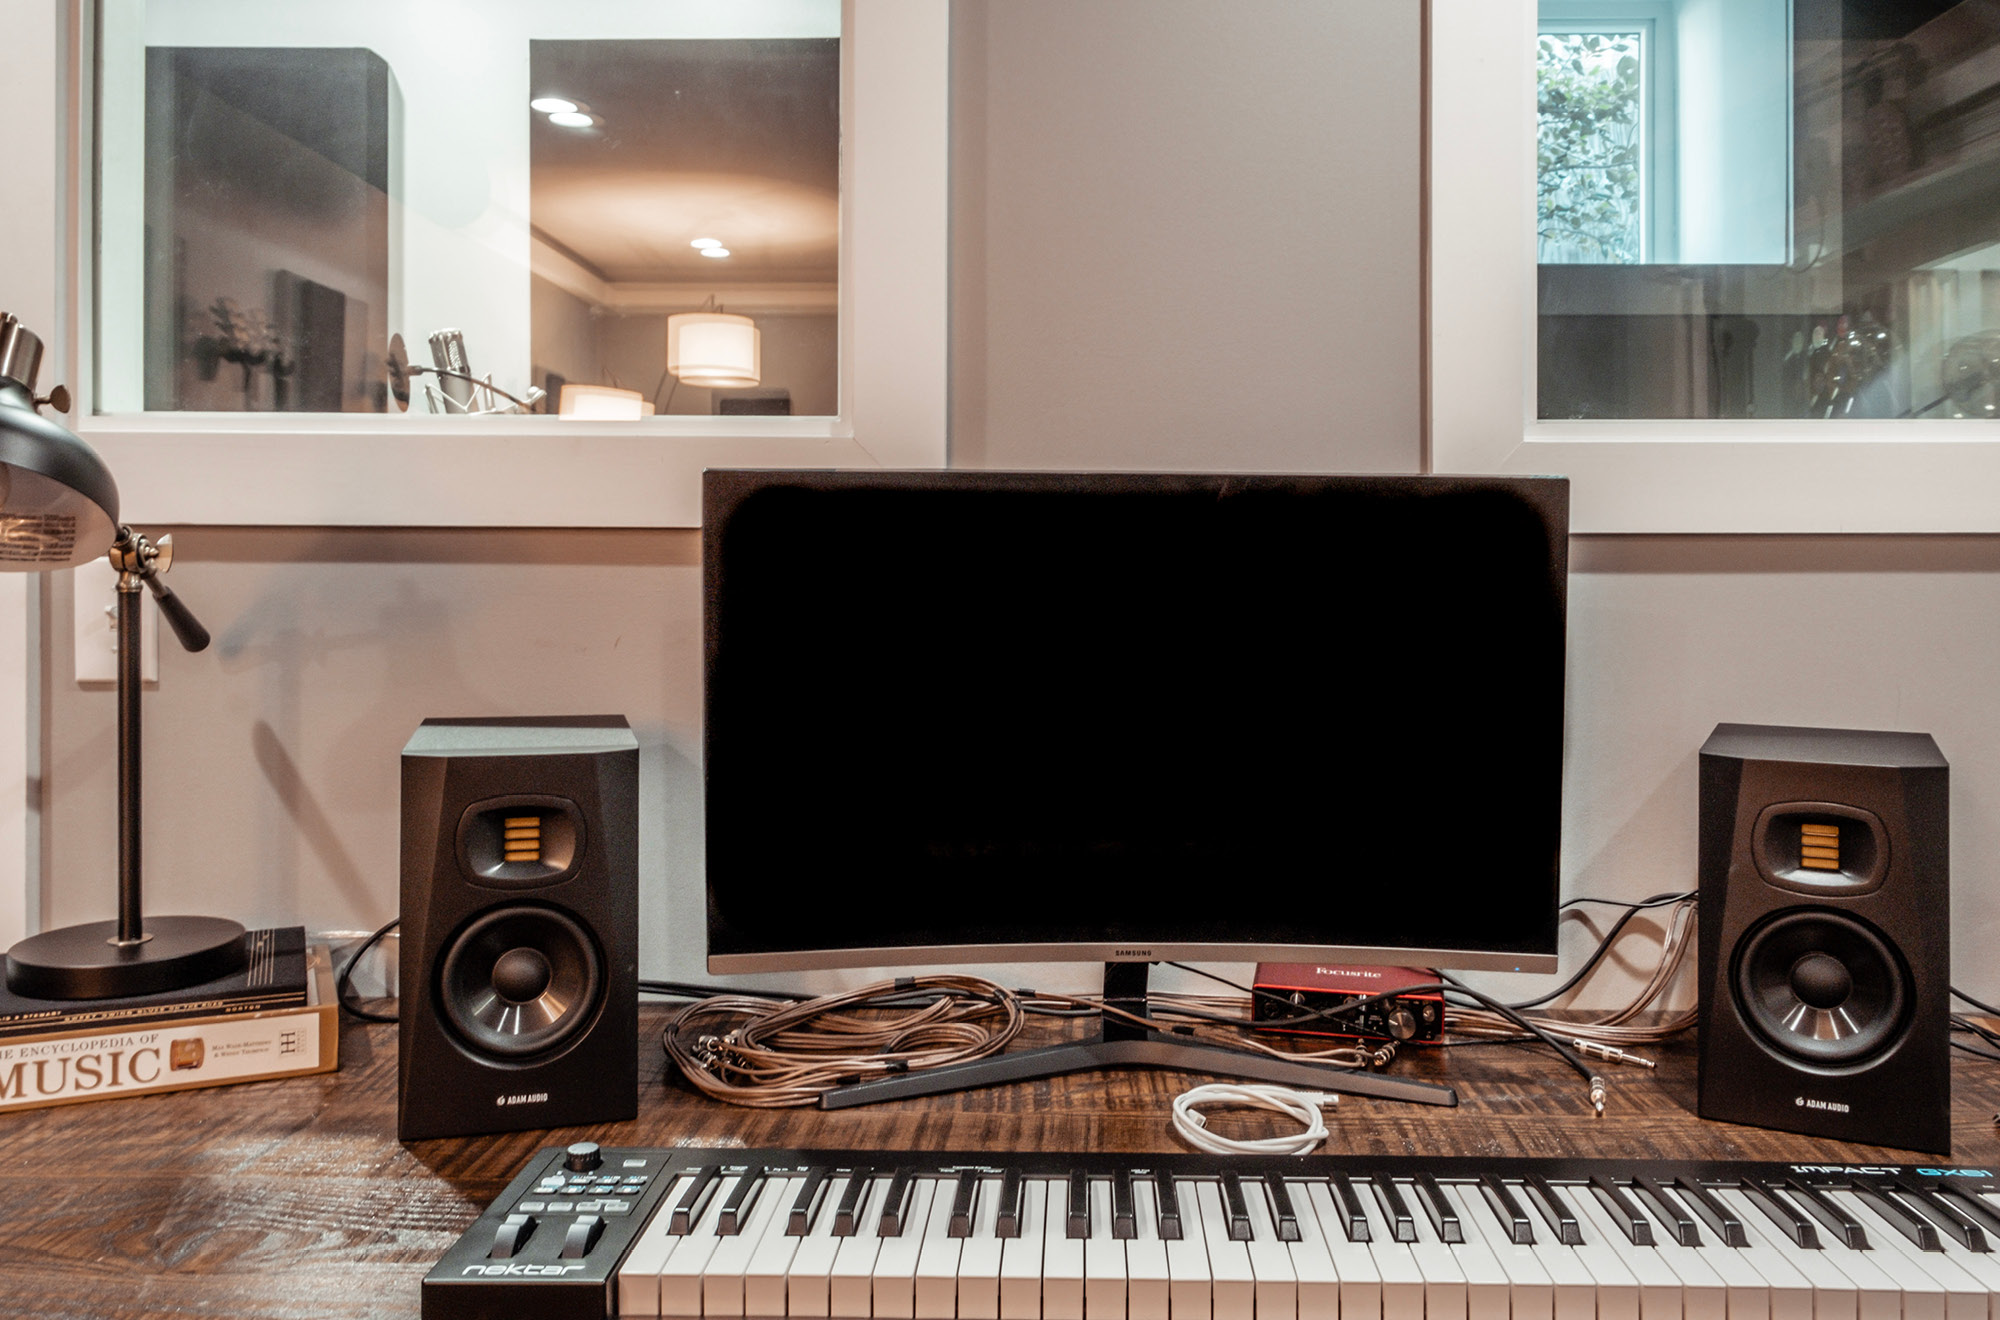 A keyboard, speakers and monitor in one of our writers rooms